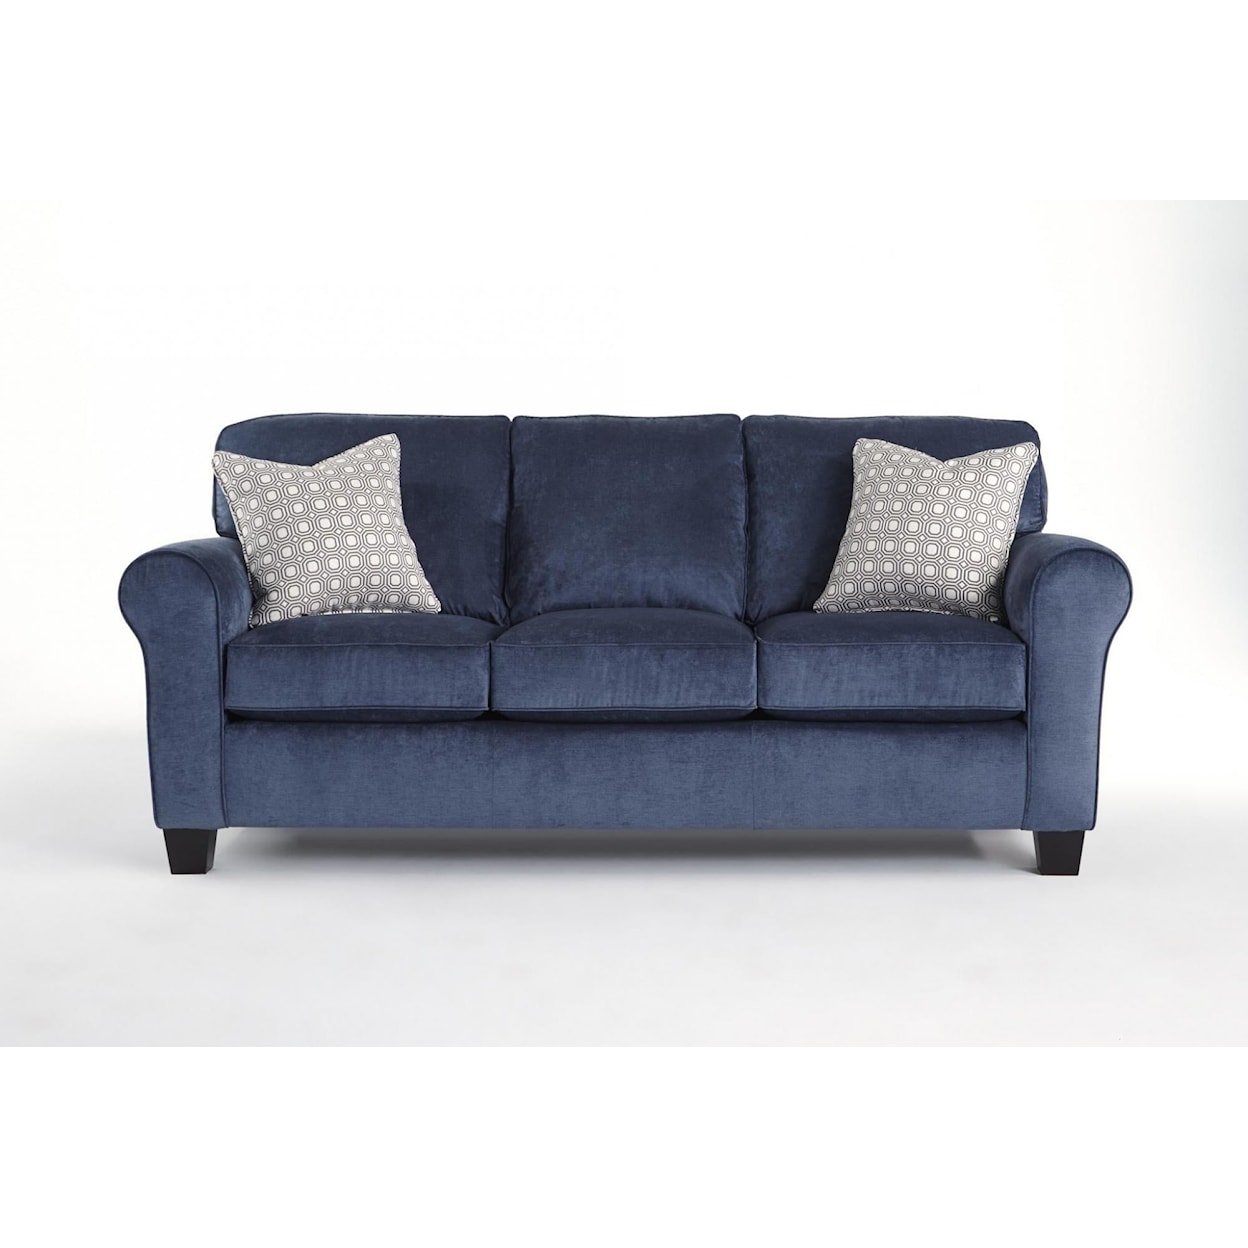 Best Home Furnishings Annabel Sofa with Exposed Wooden Legs